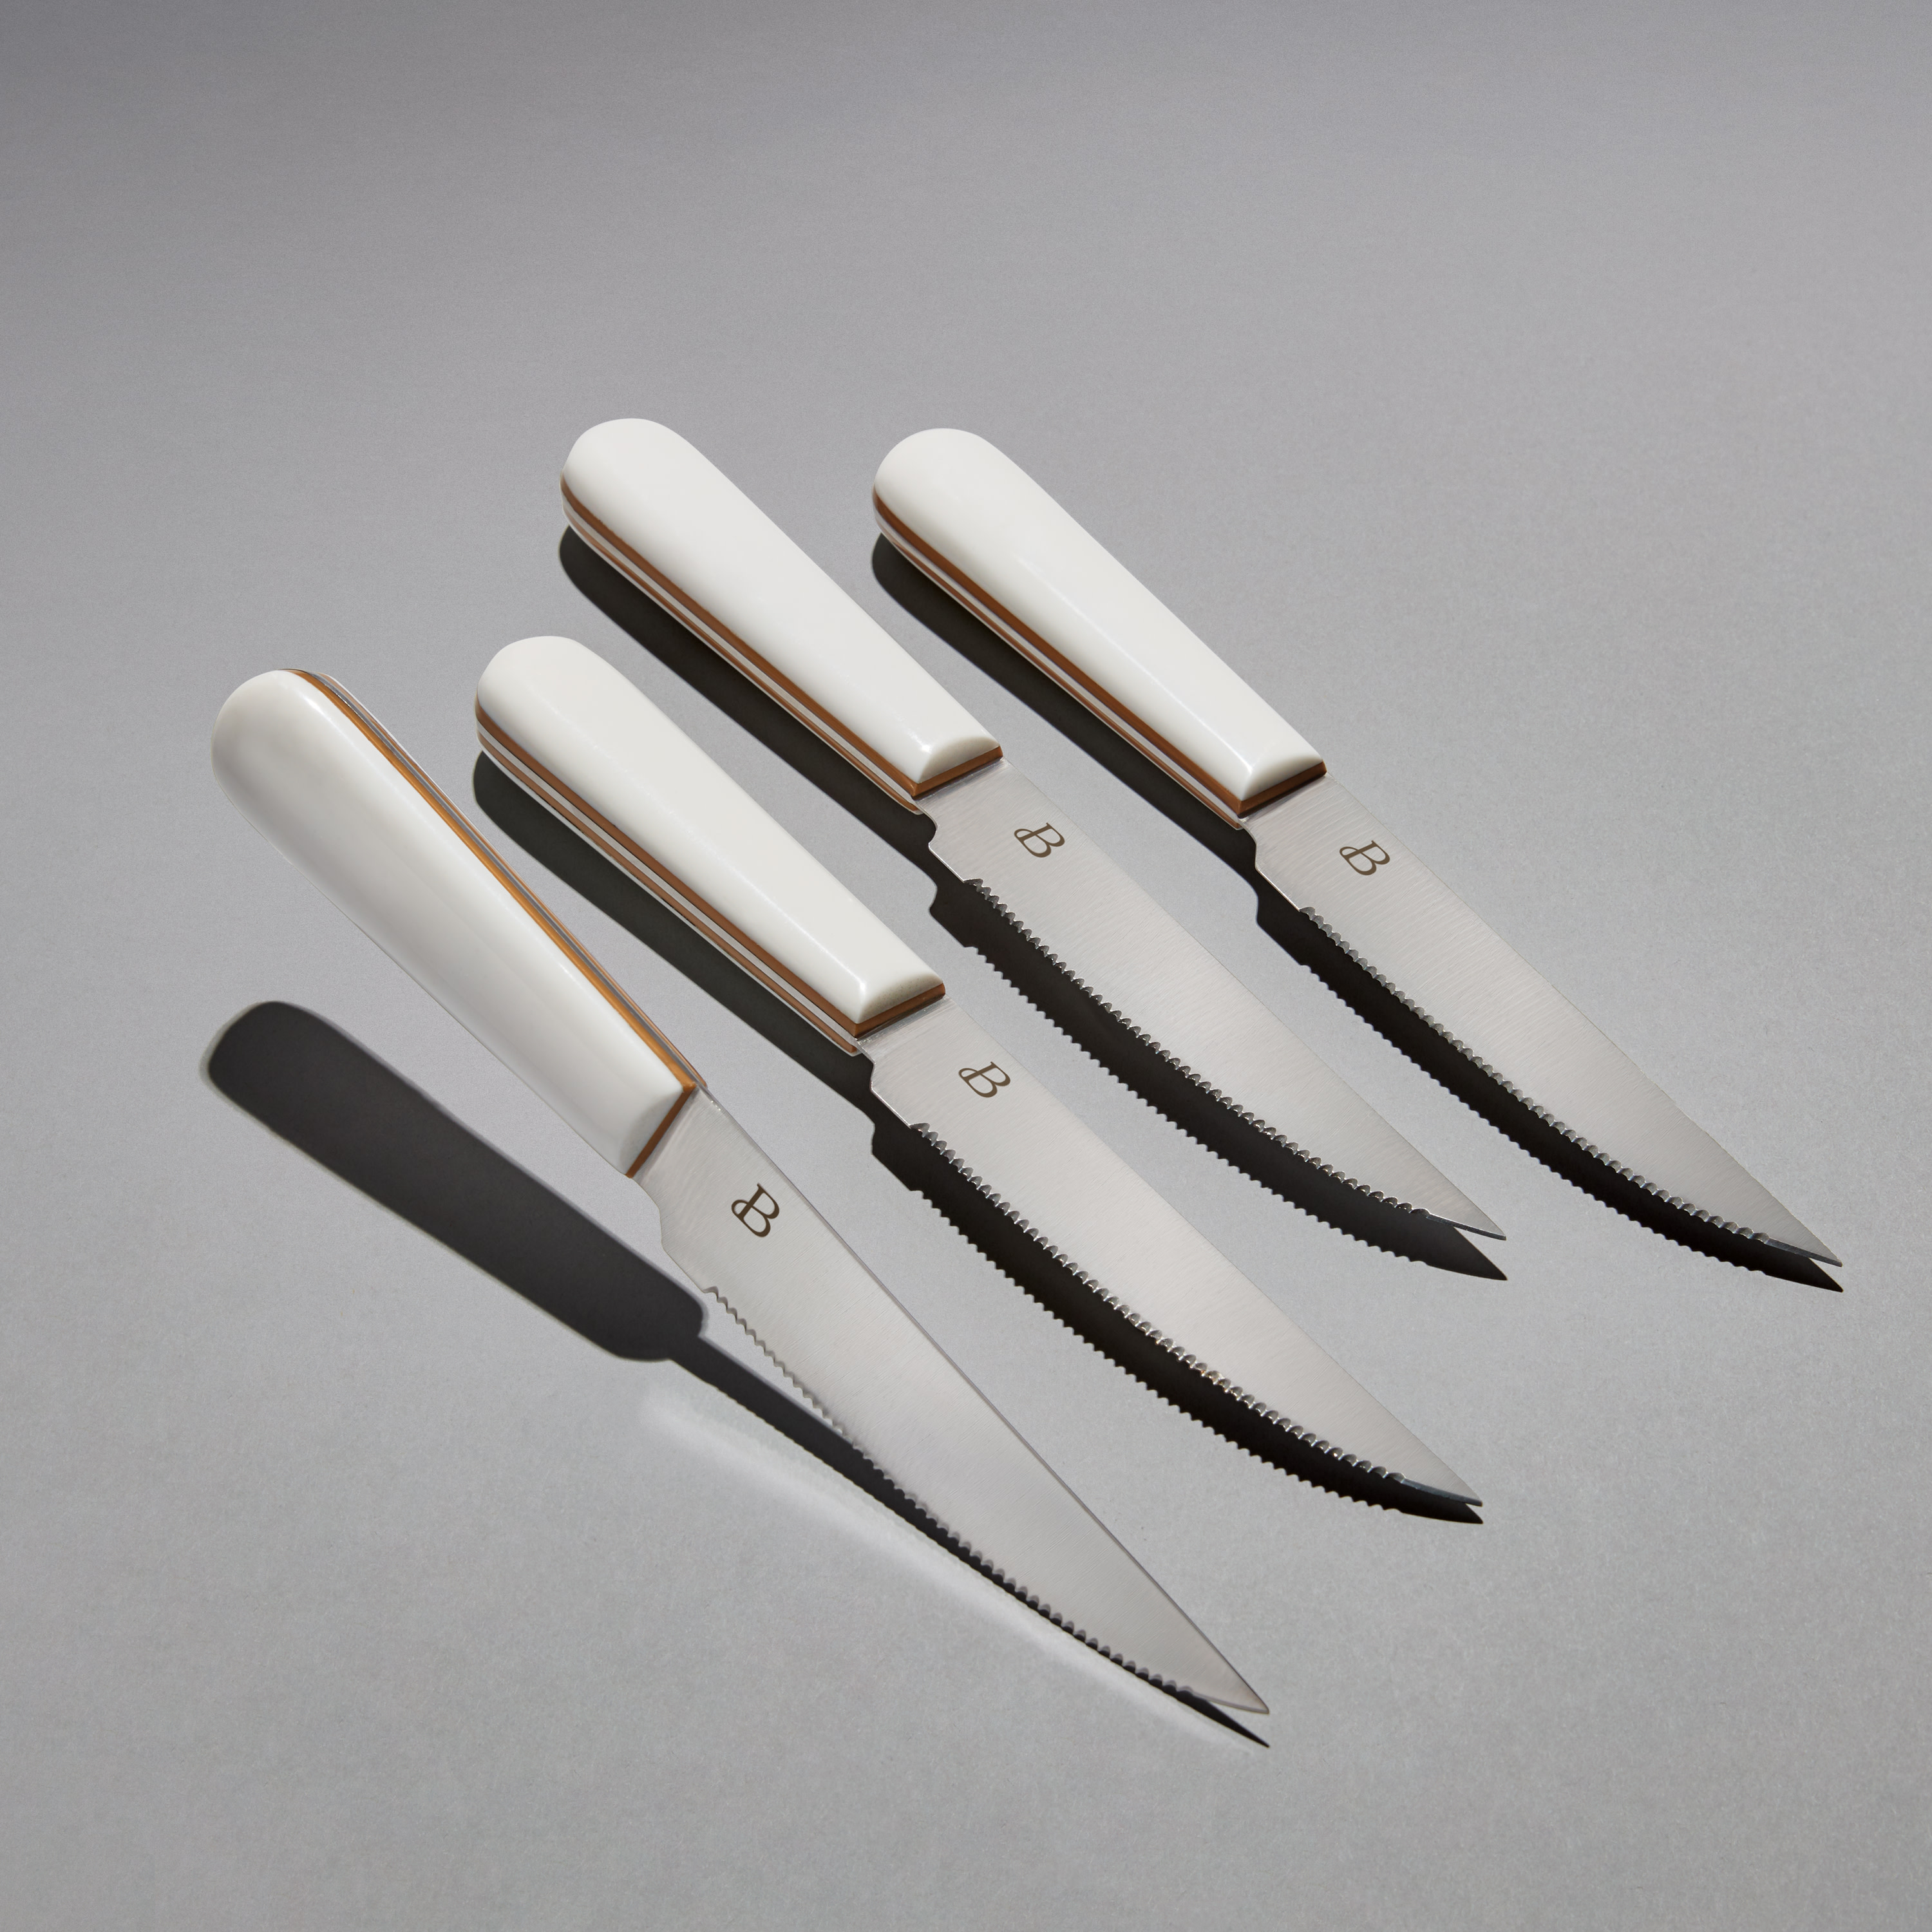 Beautiful 4-piece Forged, Micro-Serrated Kitchen Steak Knife Set in White - image 3 of 6